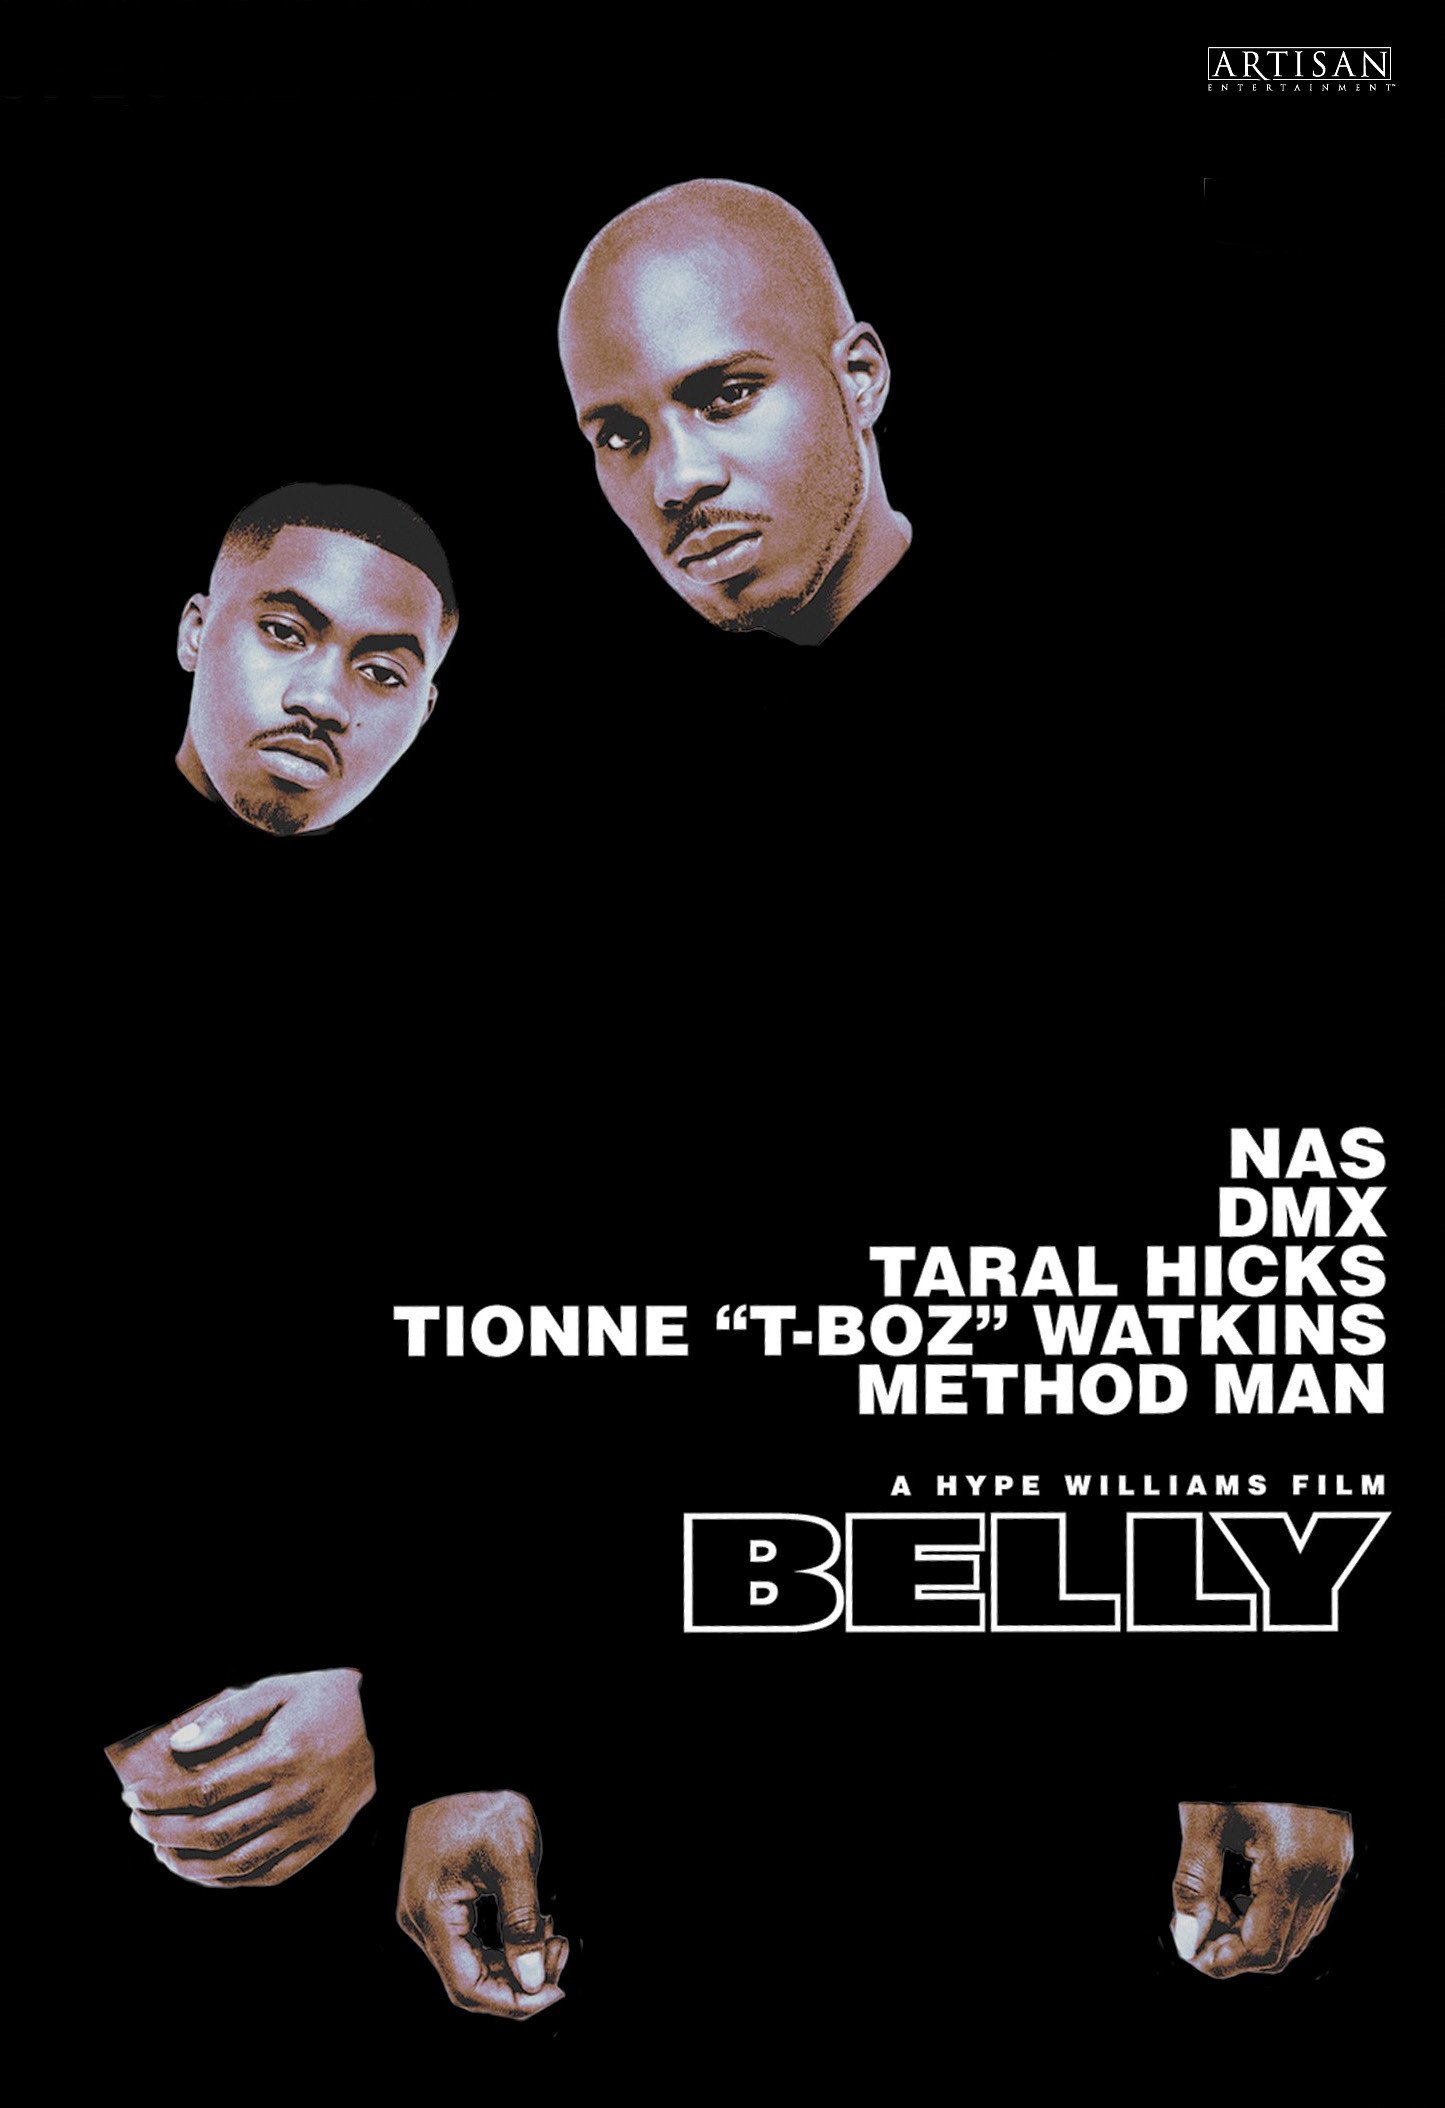 Poster of the movie Belly